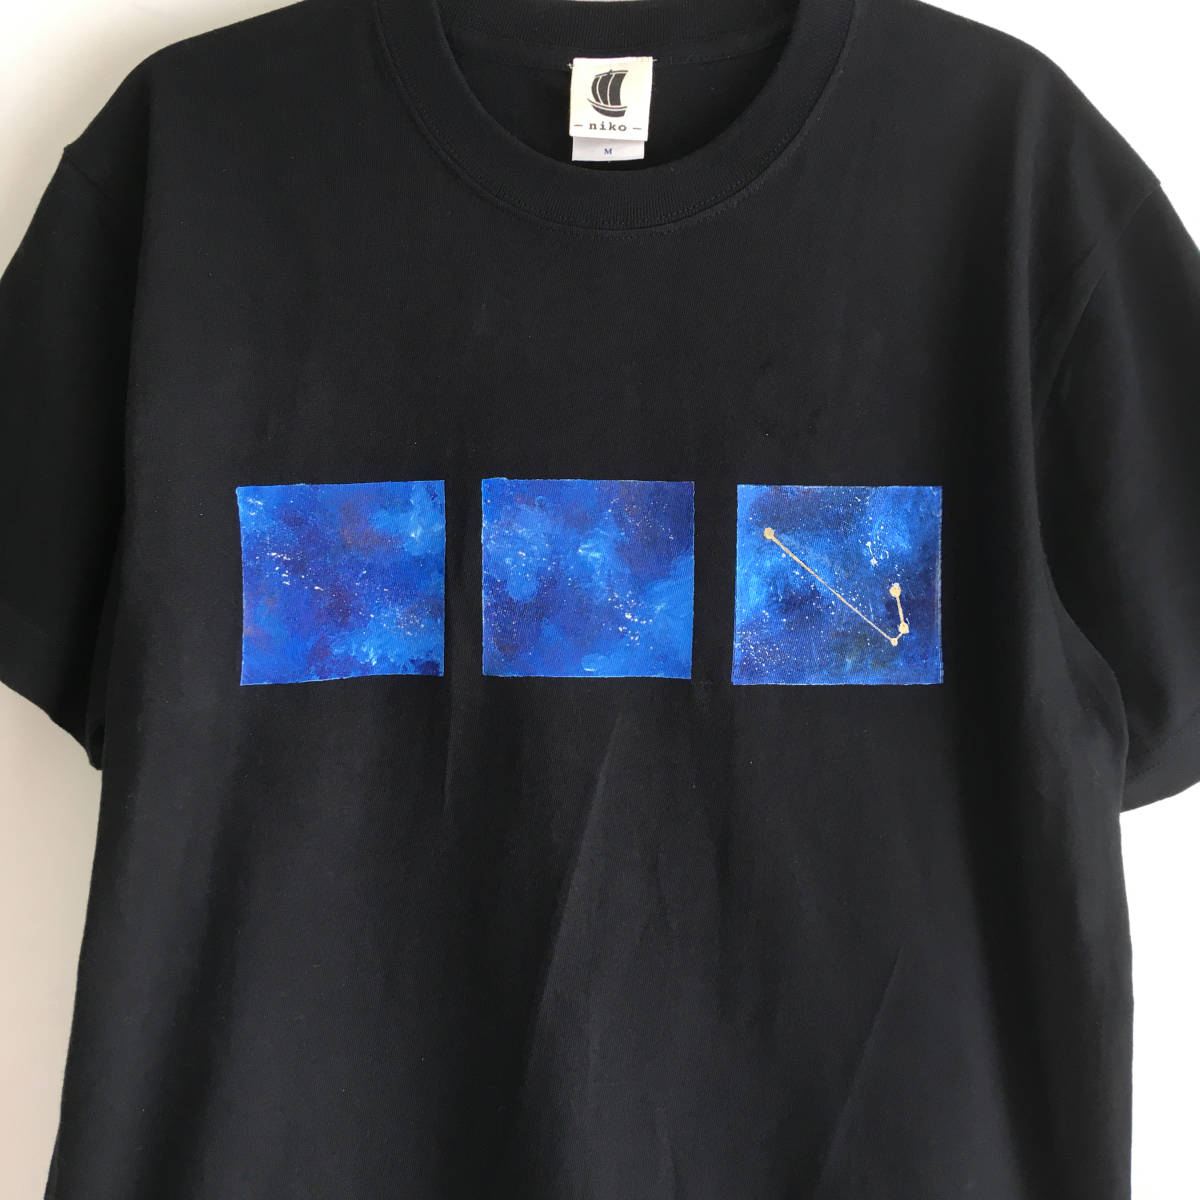 12 star seat is possible to choose hand .. cosmos pattern T-shirt black M size Milky Way Galaxy star empty 